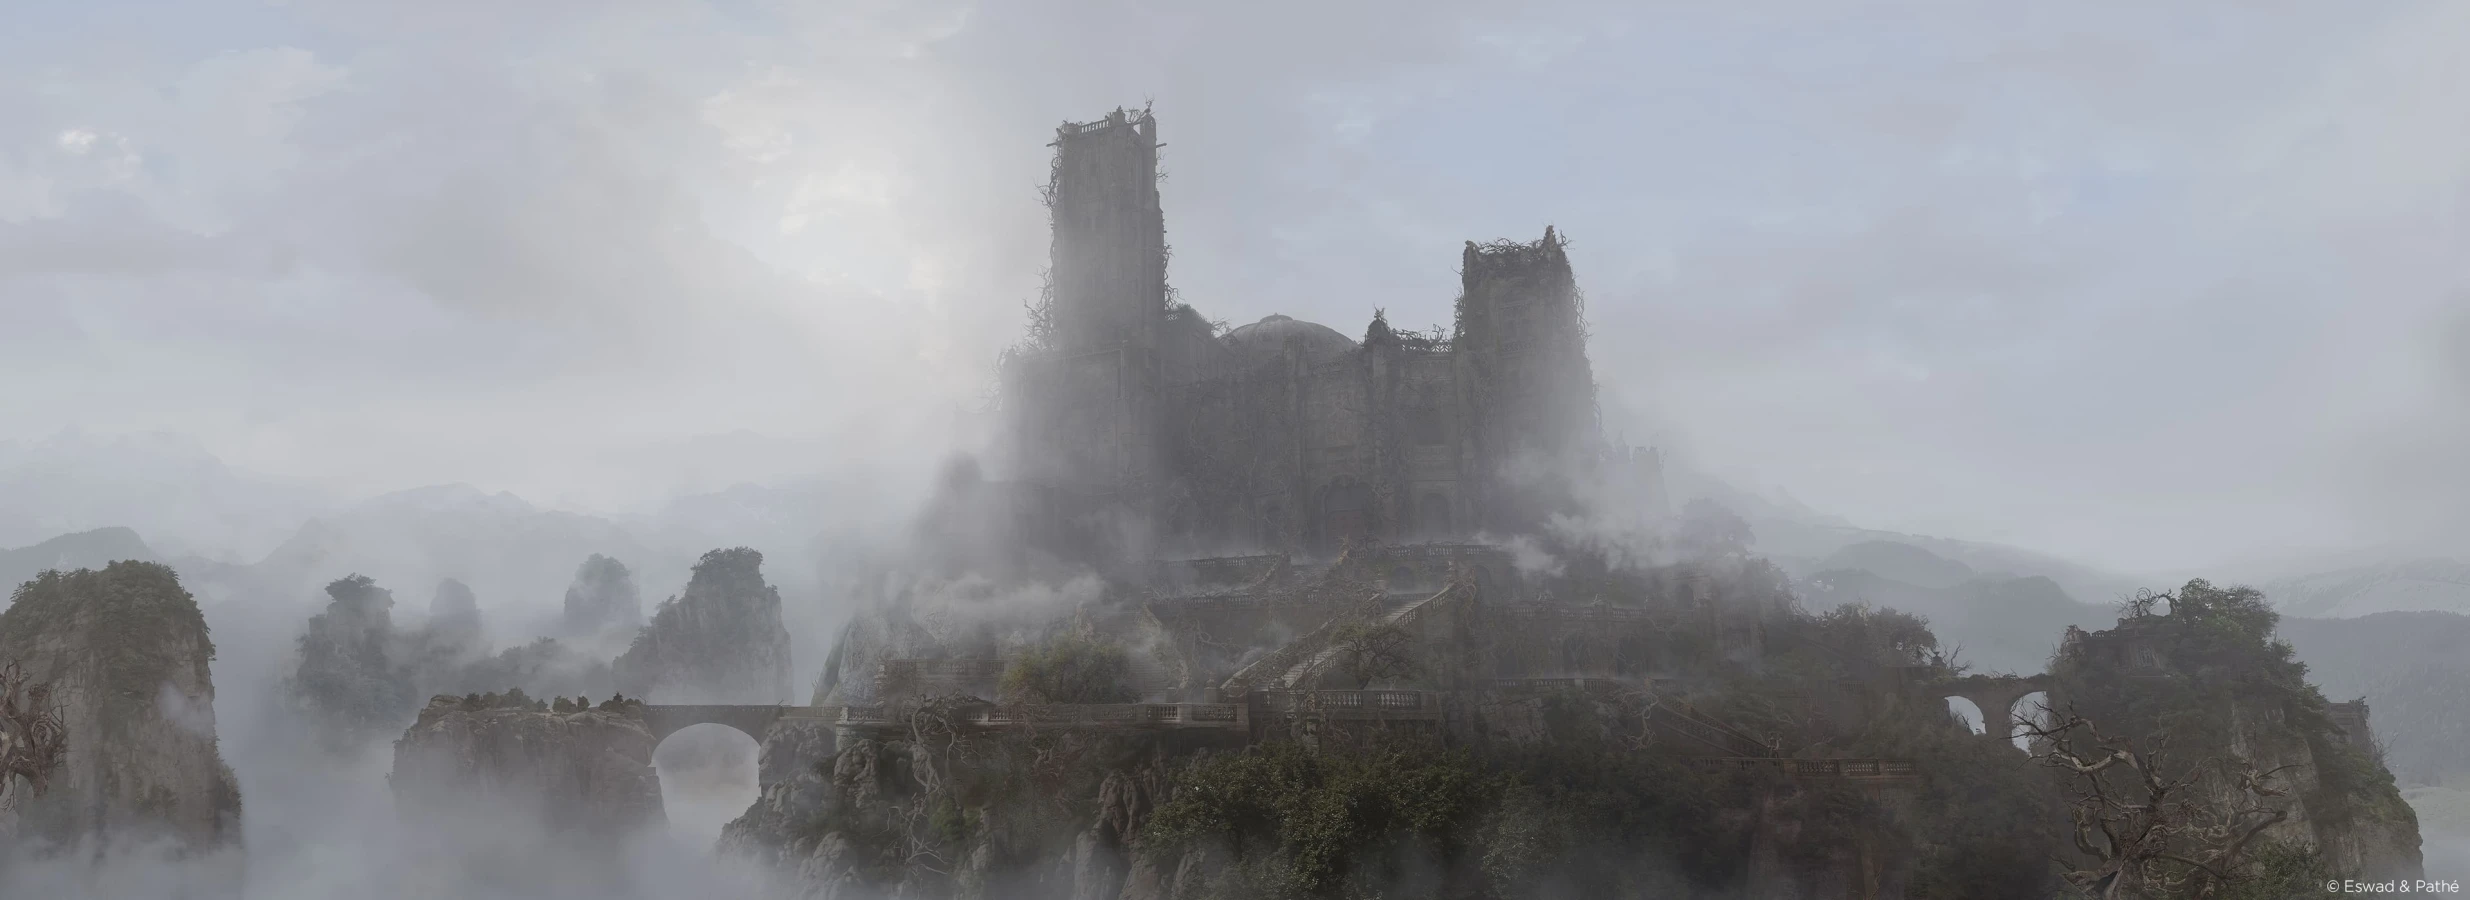  The beauty and the beast castle in fog from Raynault vfx 